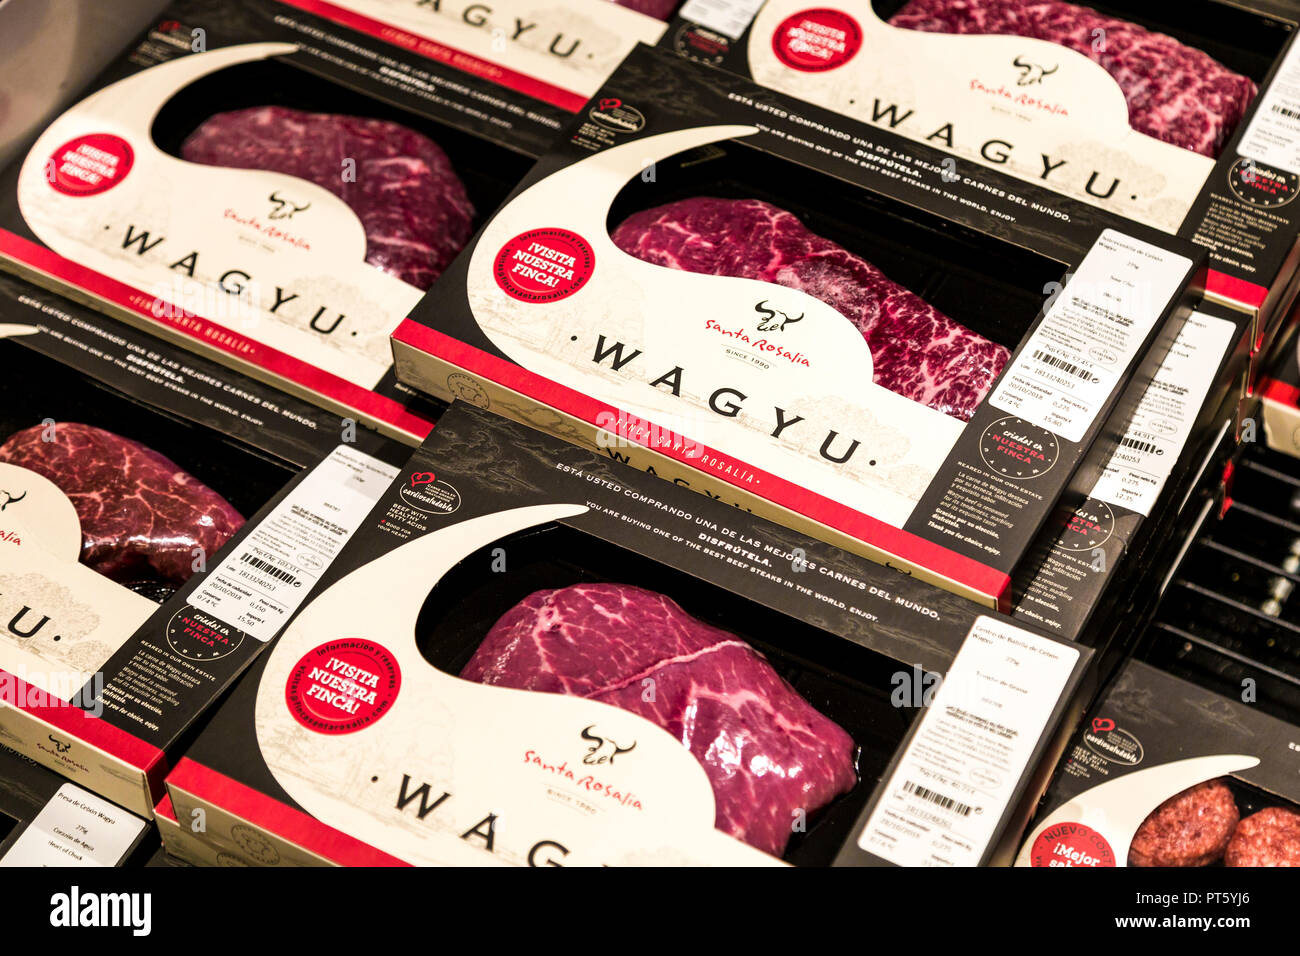 Packaged wagyu beef steaks at a supermarket Stock Photo